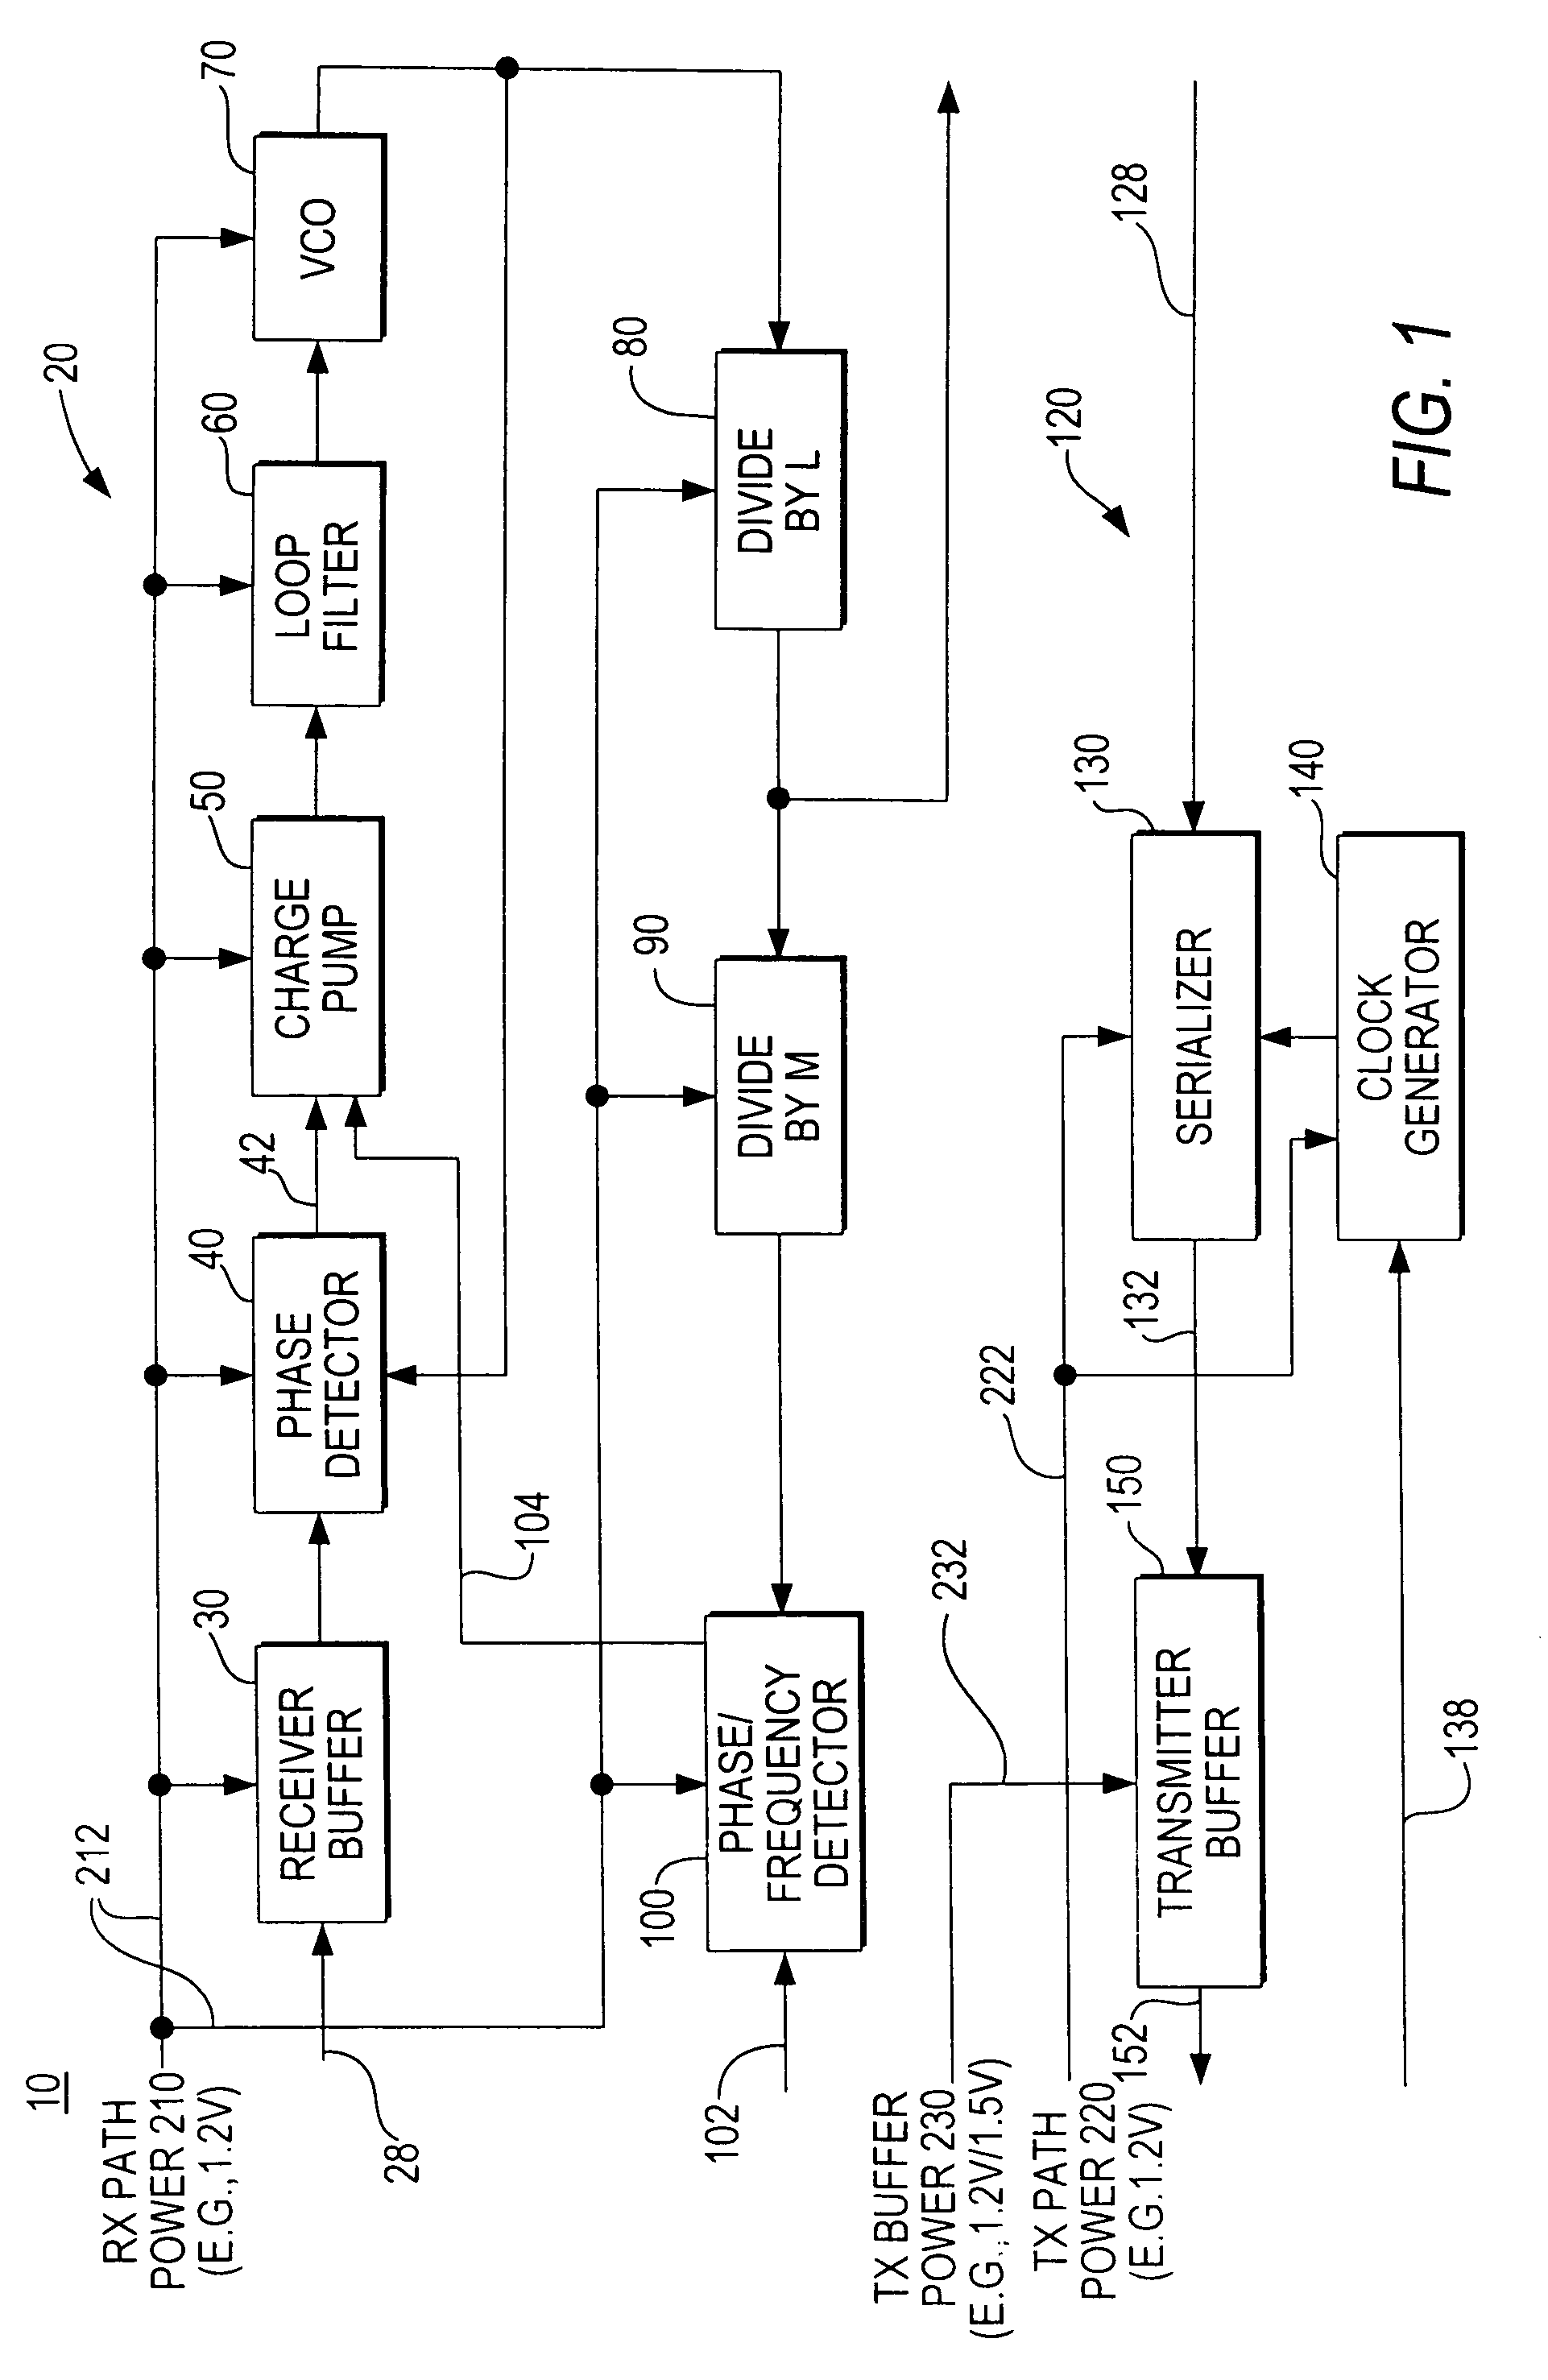 Power supply circuitry for data signal transceivers on integrated circuits